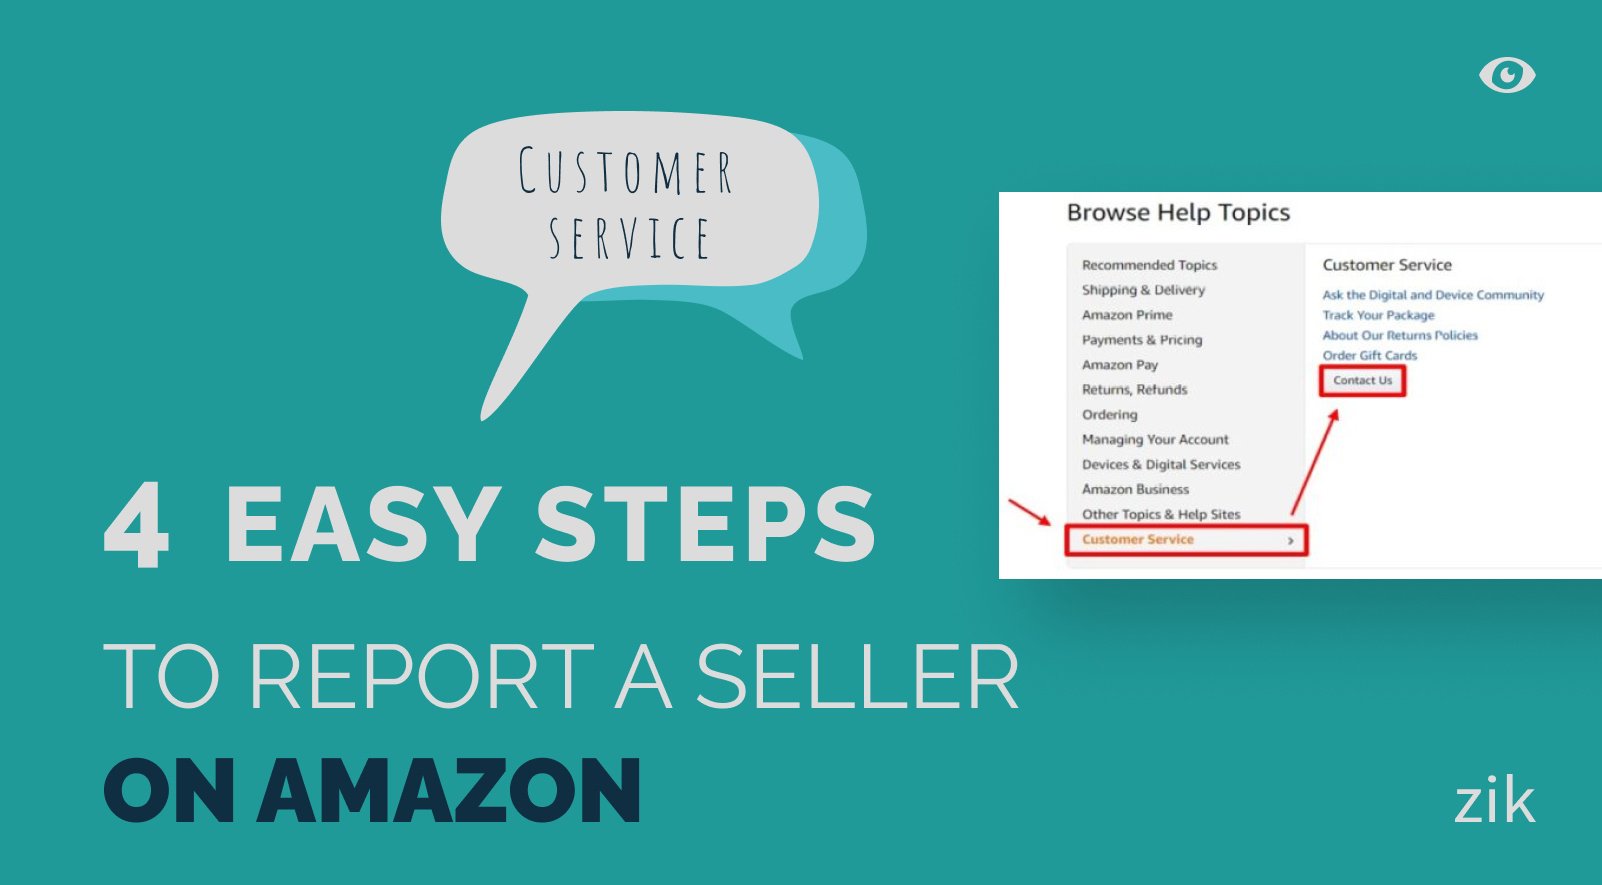 4 Easy Steps to Report a Seller on Amazon